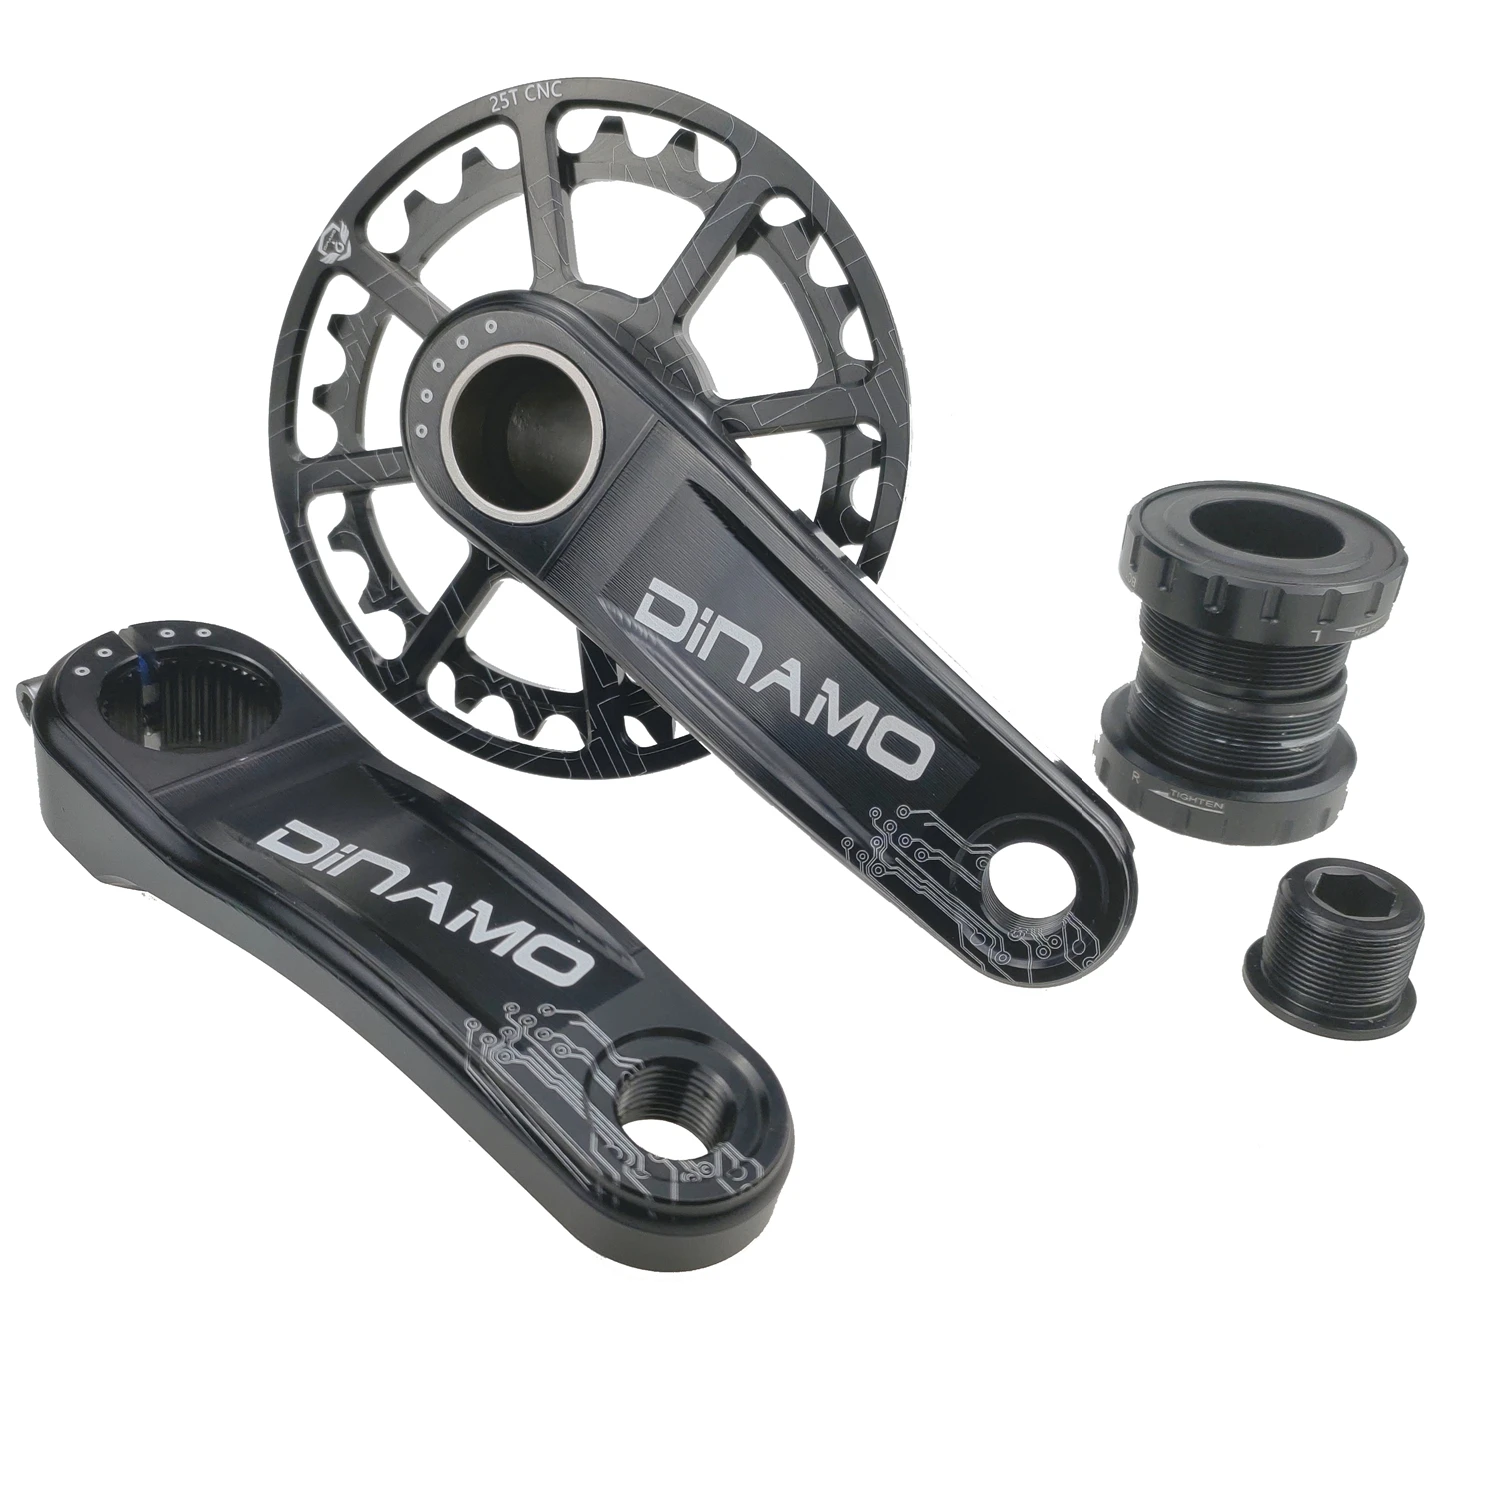 Hot Deal Customize Road Bike/bicycle Crankset More Comfortable Hollow Axle